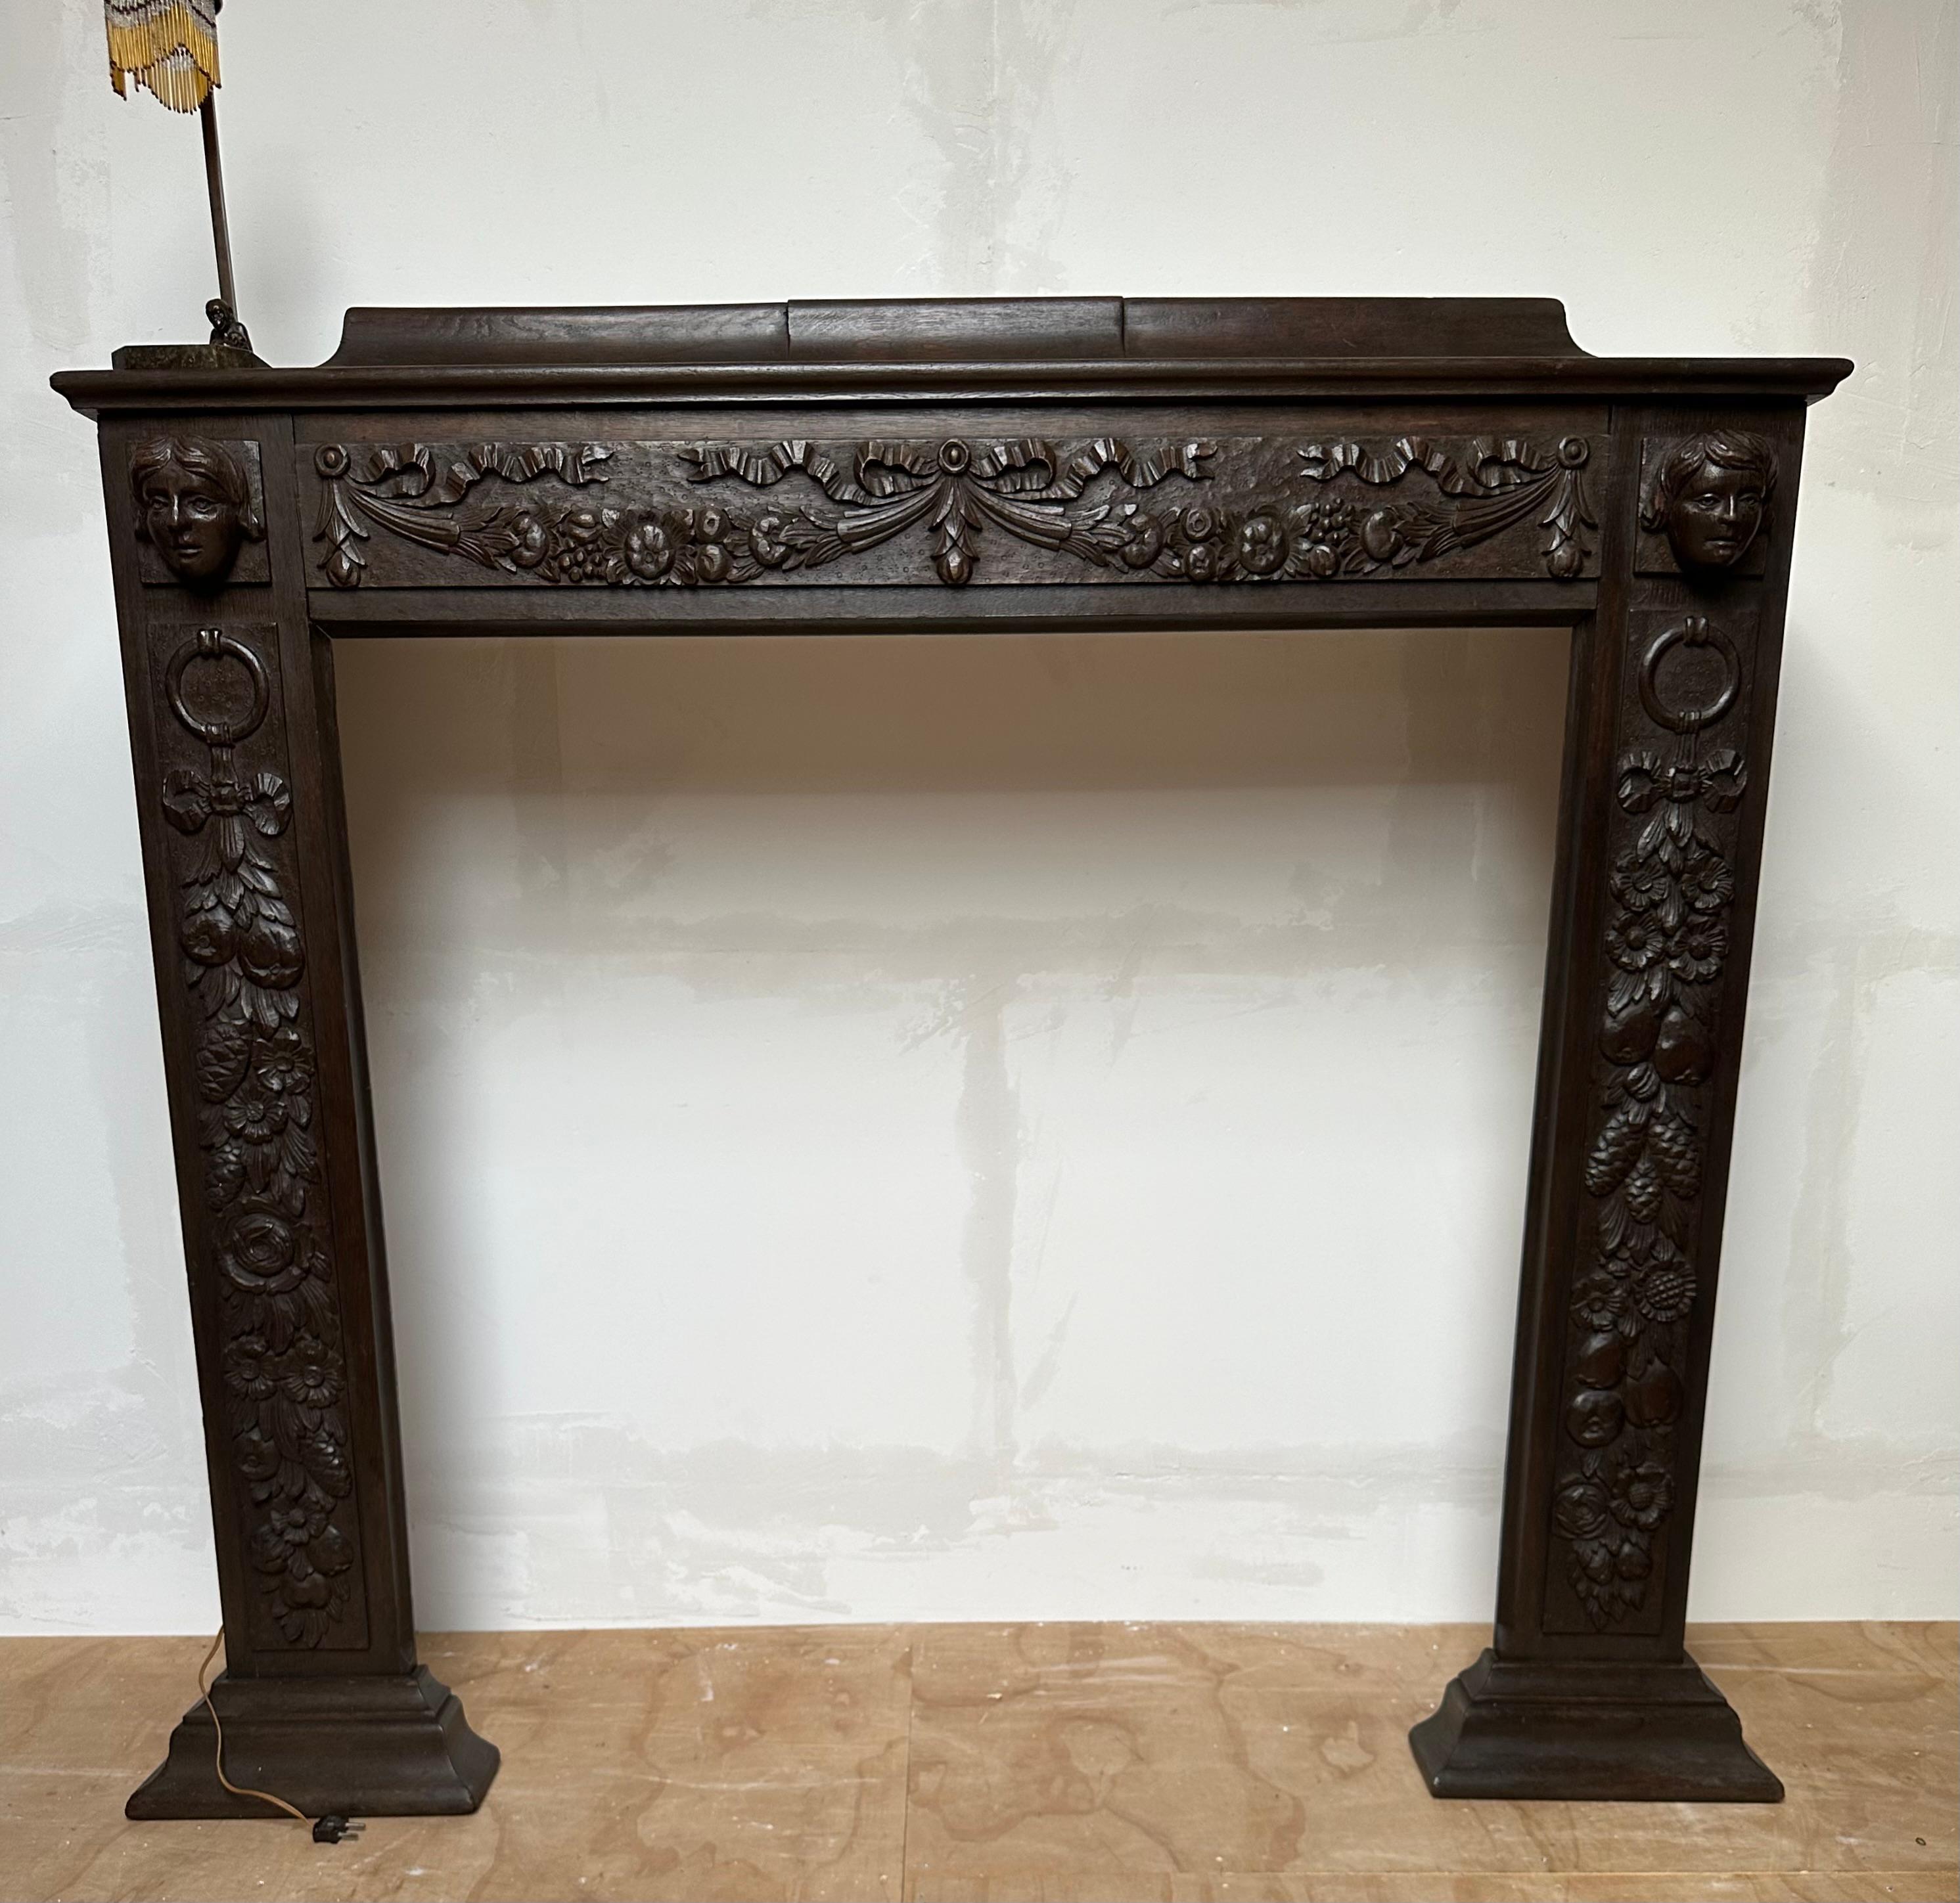 Exceptional antique fire-place mantle with rare and marvelous deep carvings. 

If you are a collector of rare and great looking architectural antiques then this good size and great condition antique fireplace surround could be yours to own and enjoy